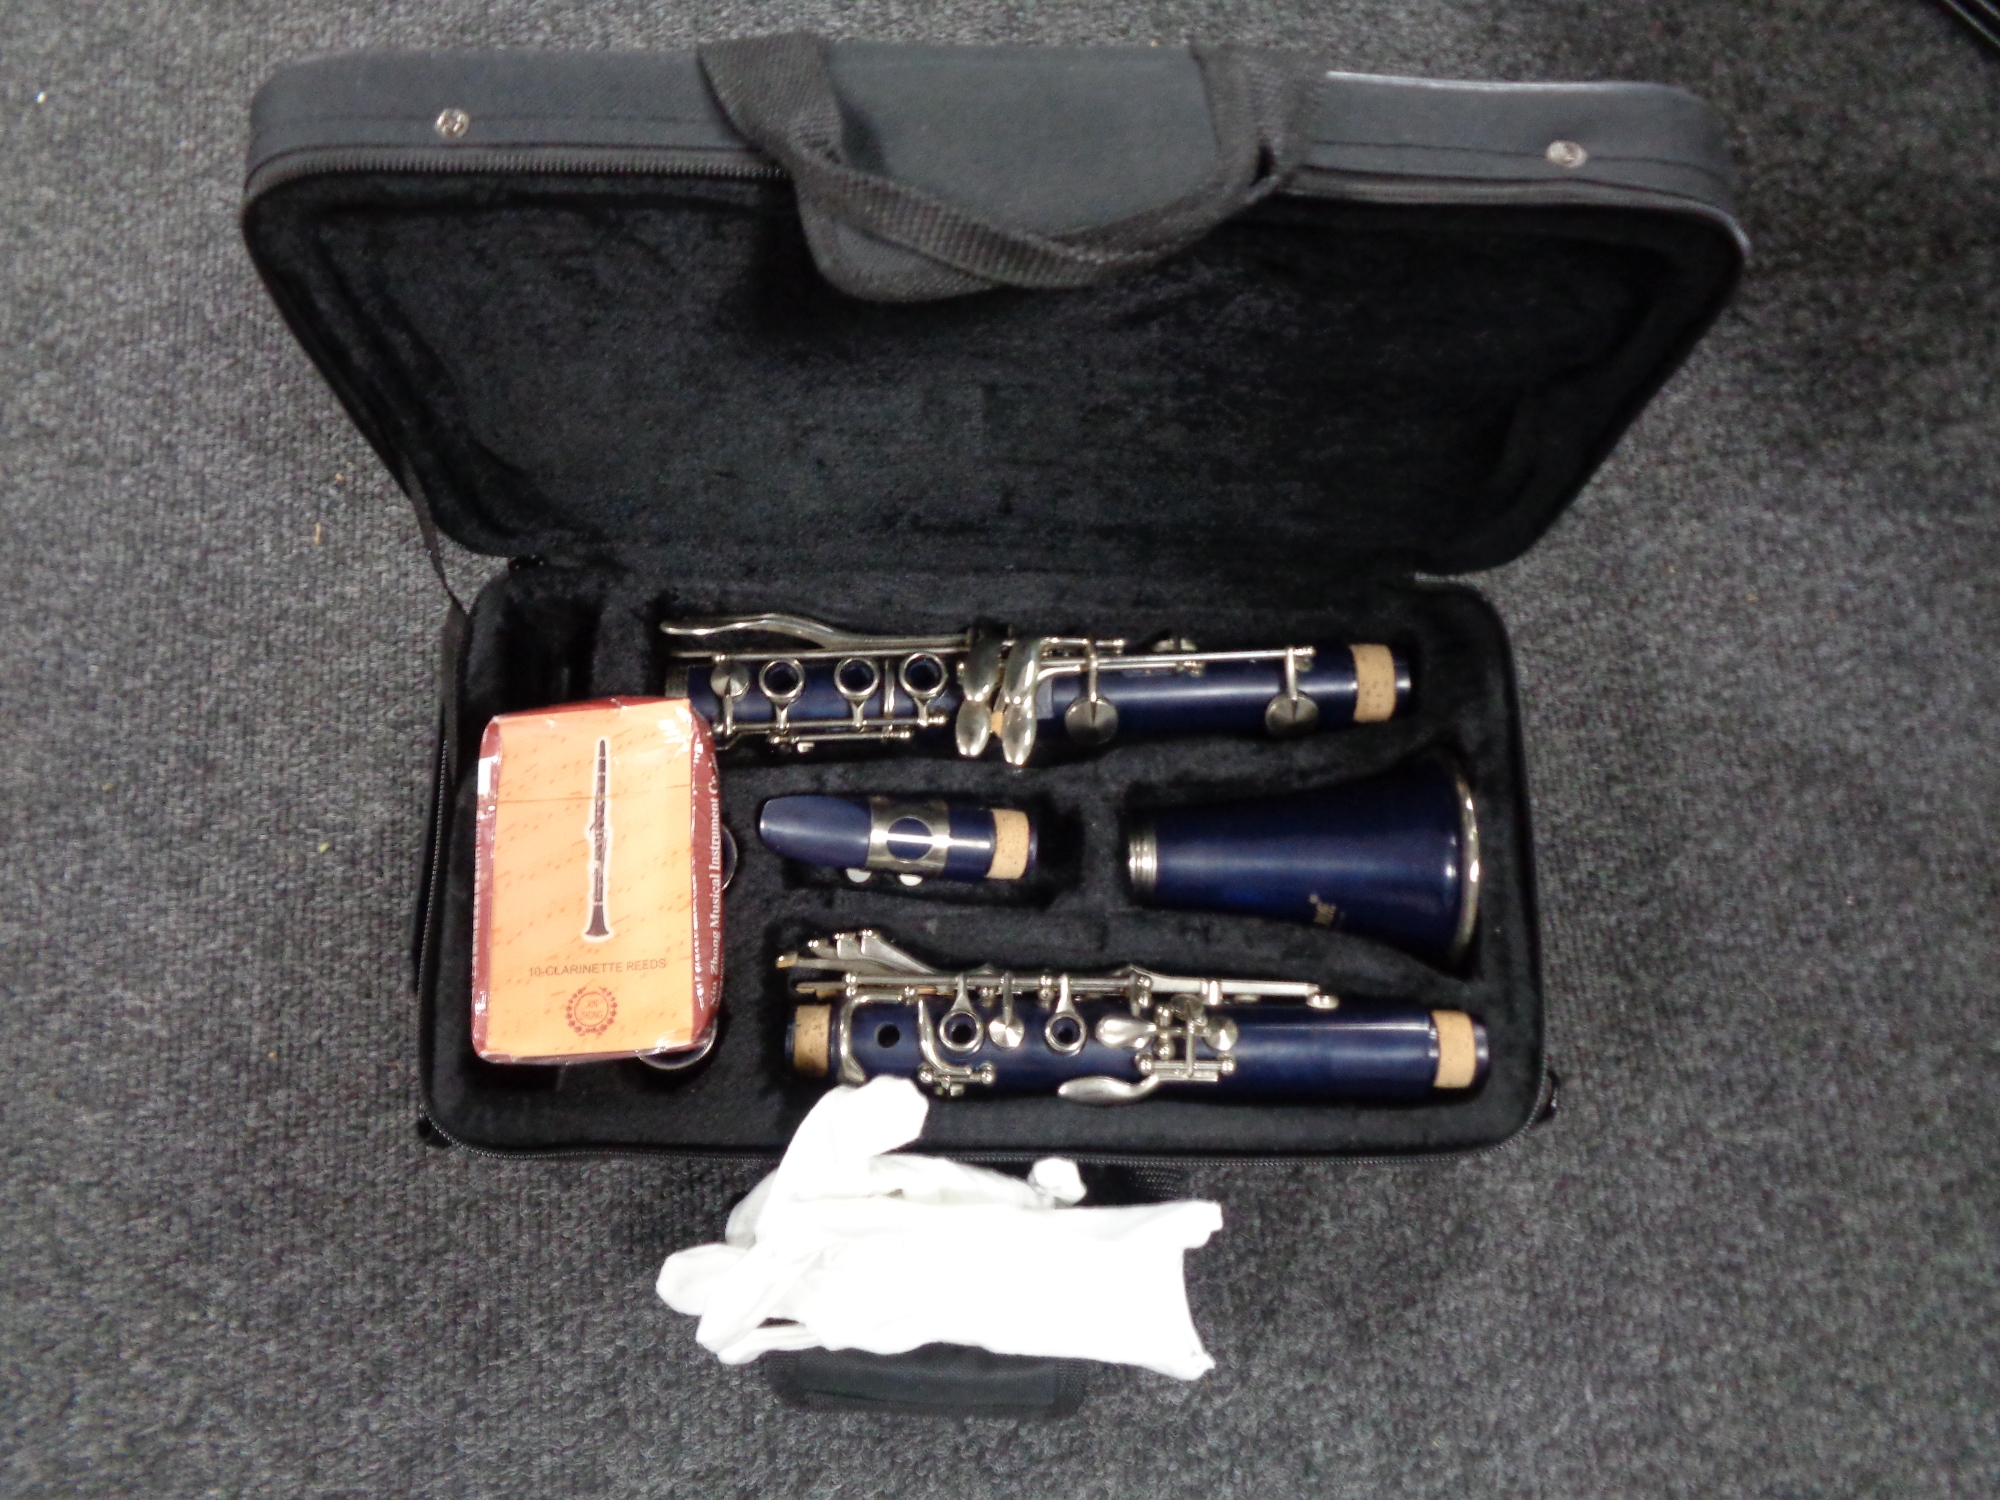 A four piece Slade clarinet in case with reeds and gloves